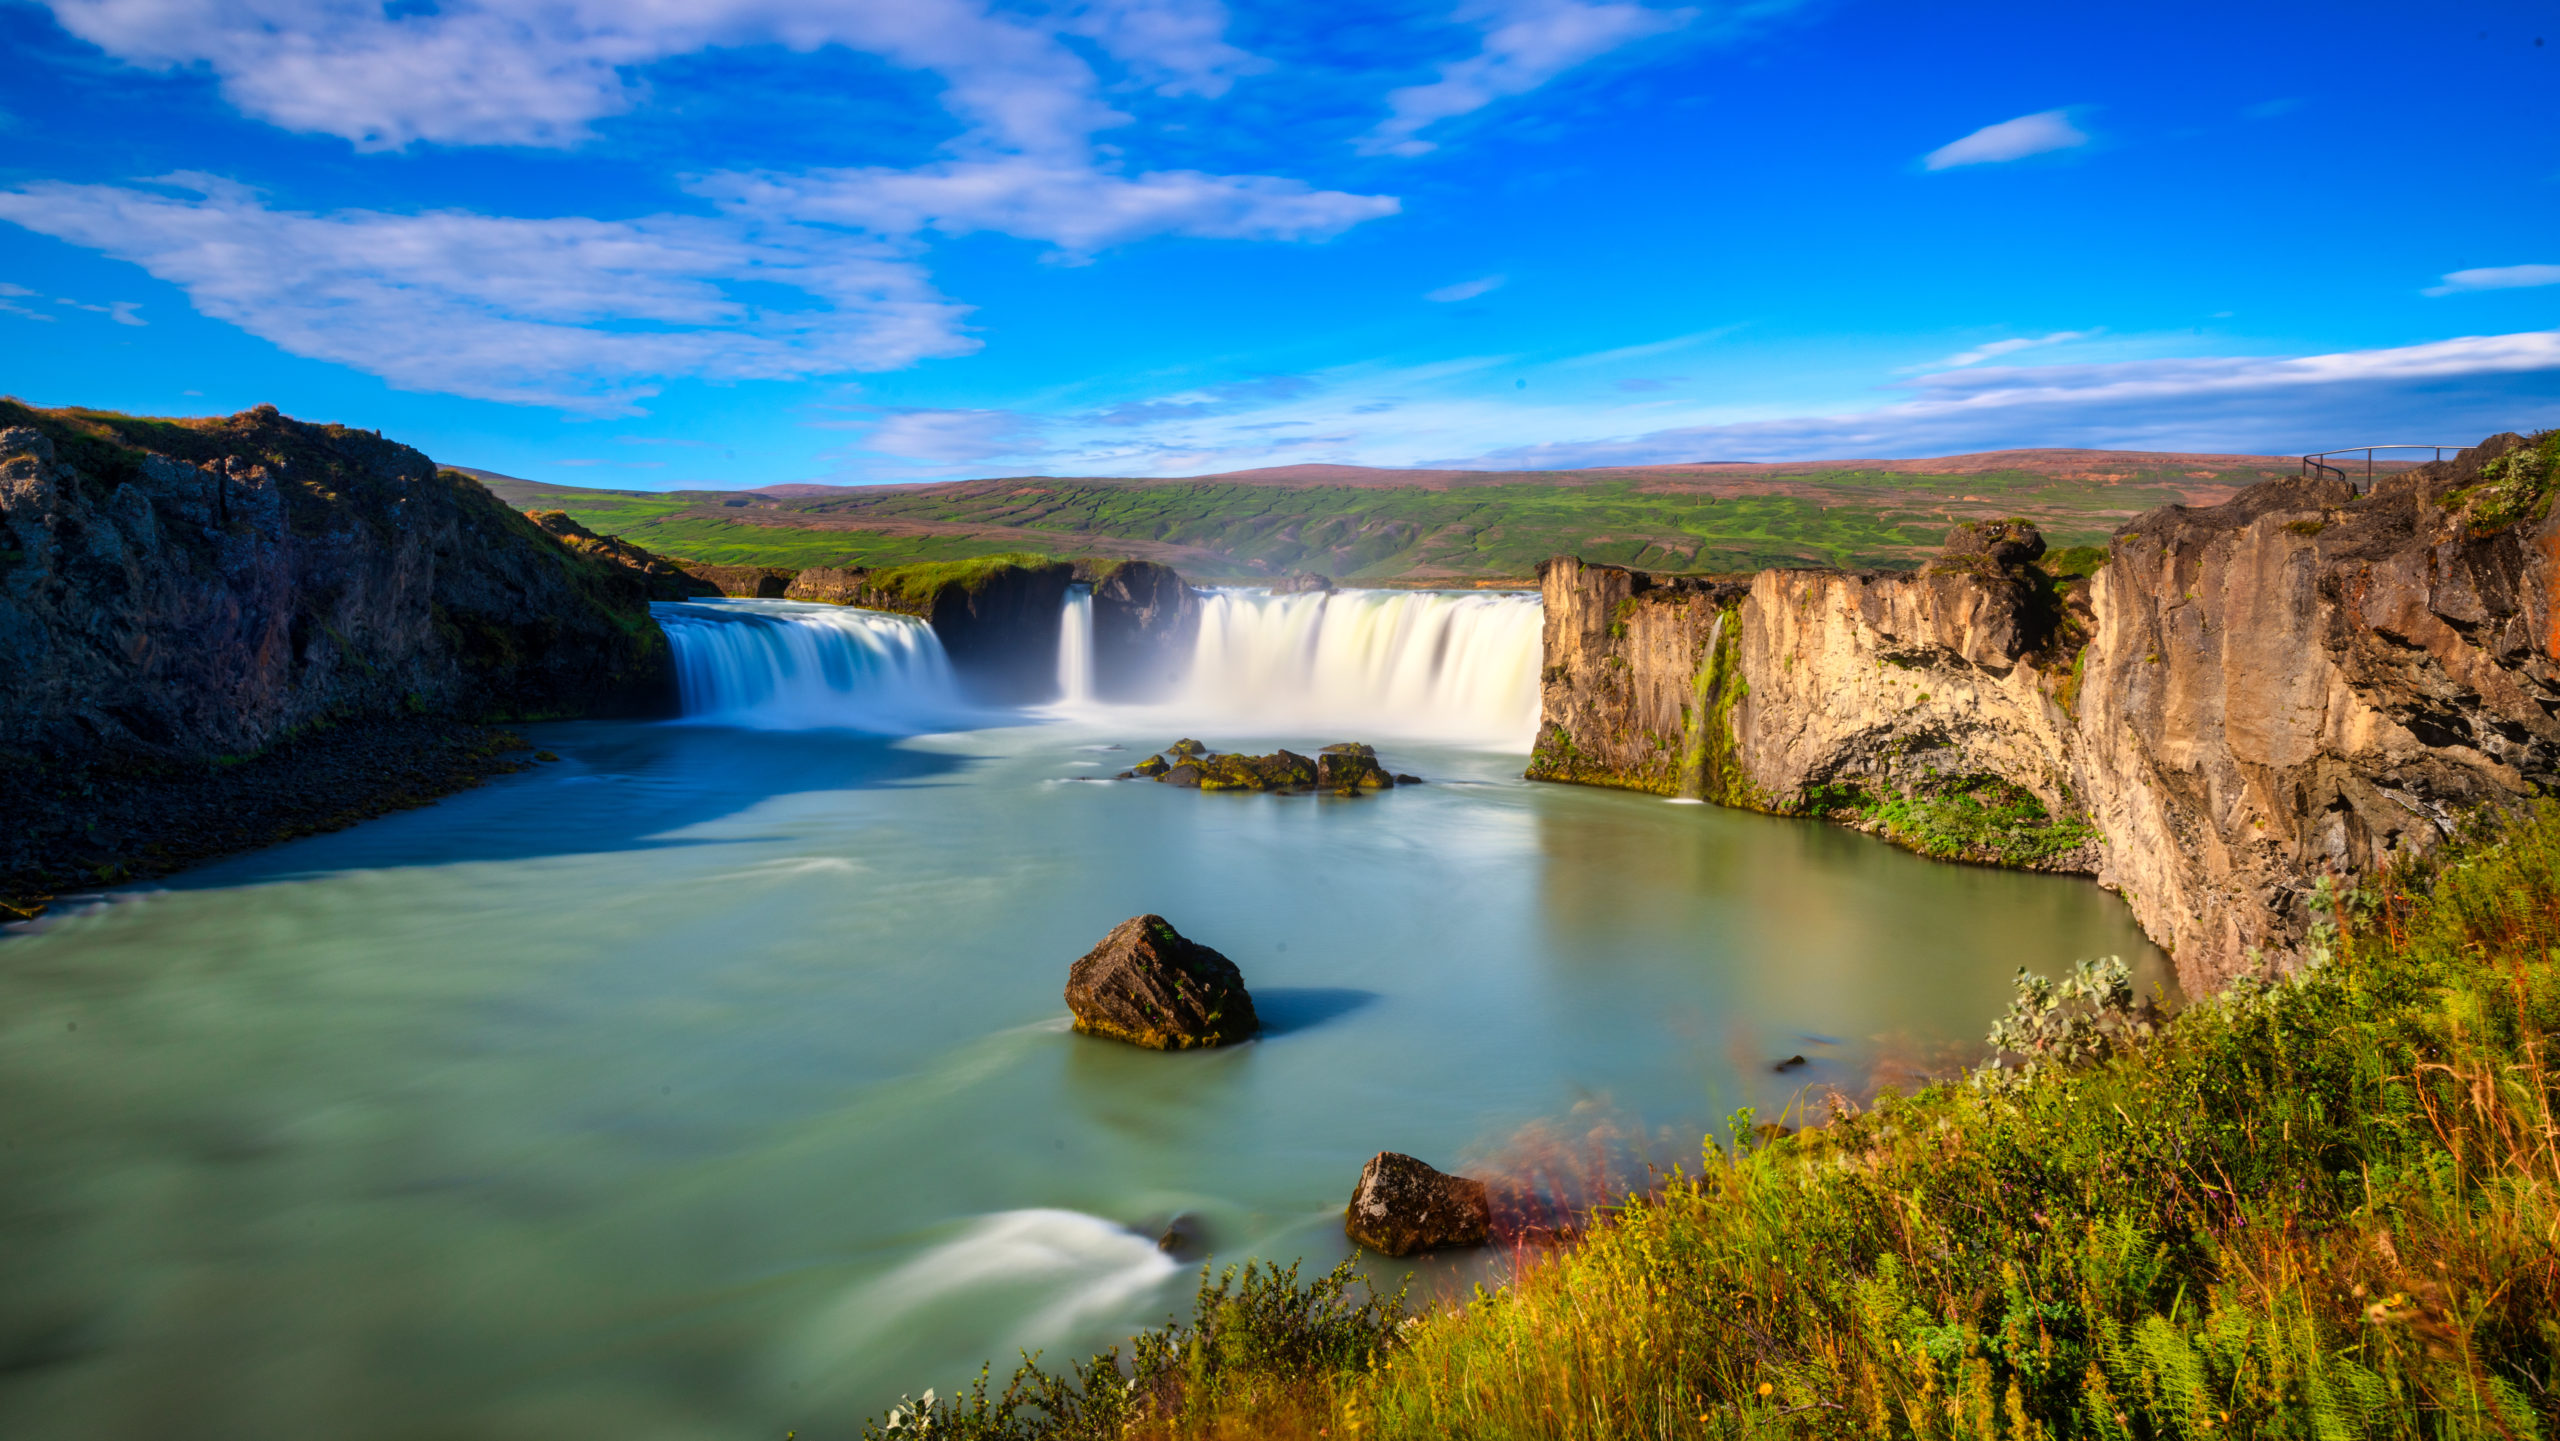 Goðafoss is one of the hundreds of show-stopping waterfalls Iceland